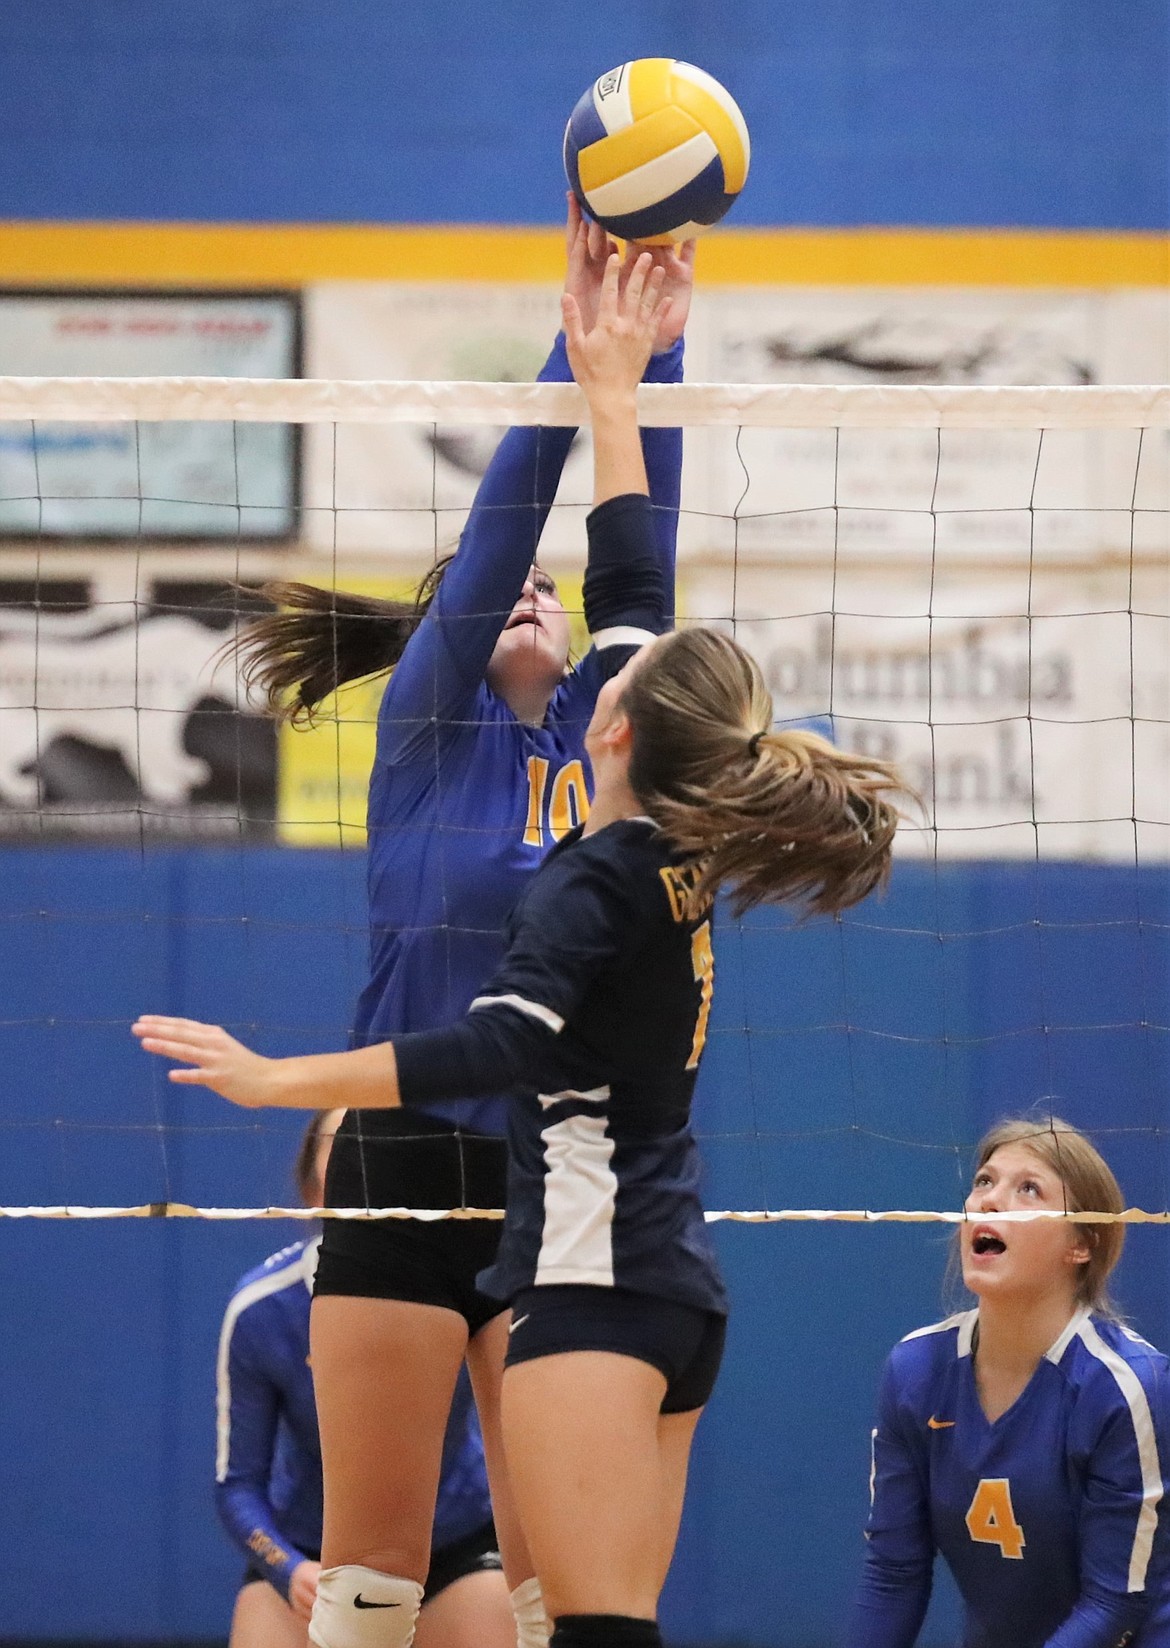 Caiya Yanik elevates to tip the ball over the net on Thursday.